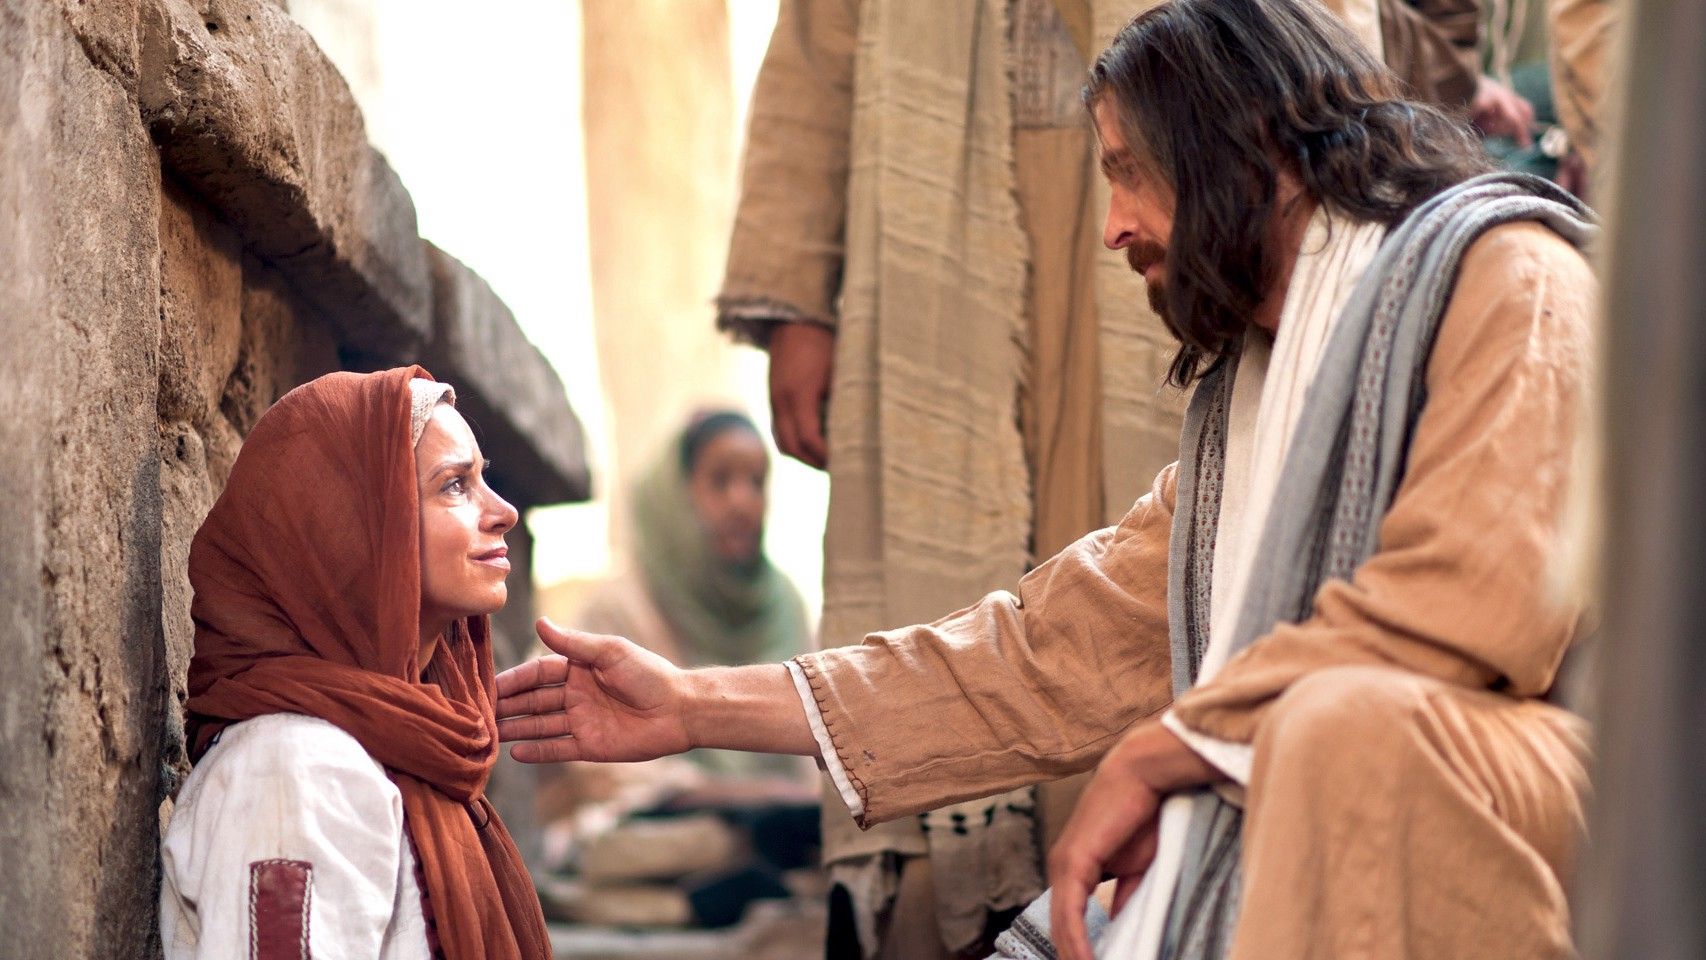 Jesus's Healing of the Woman with the Issue of Blood